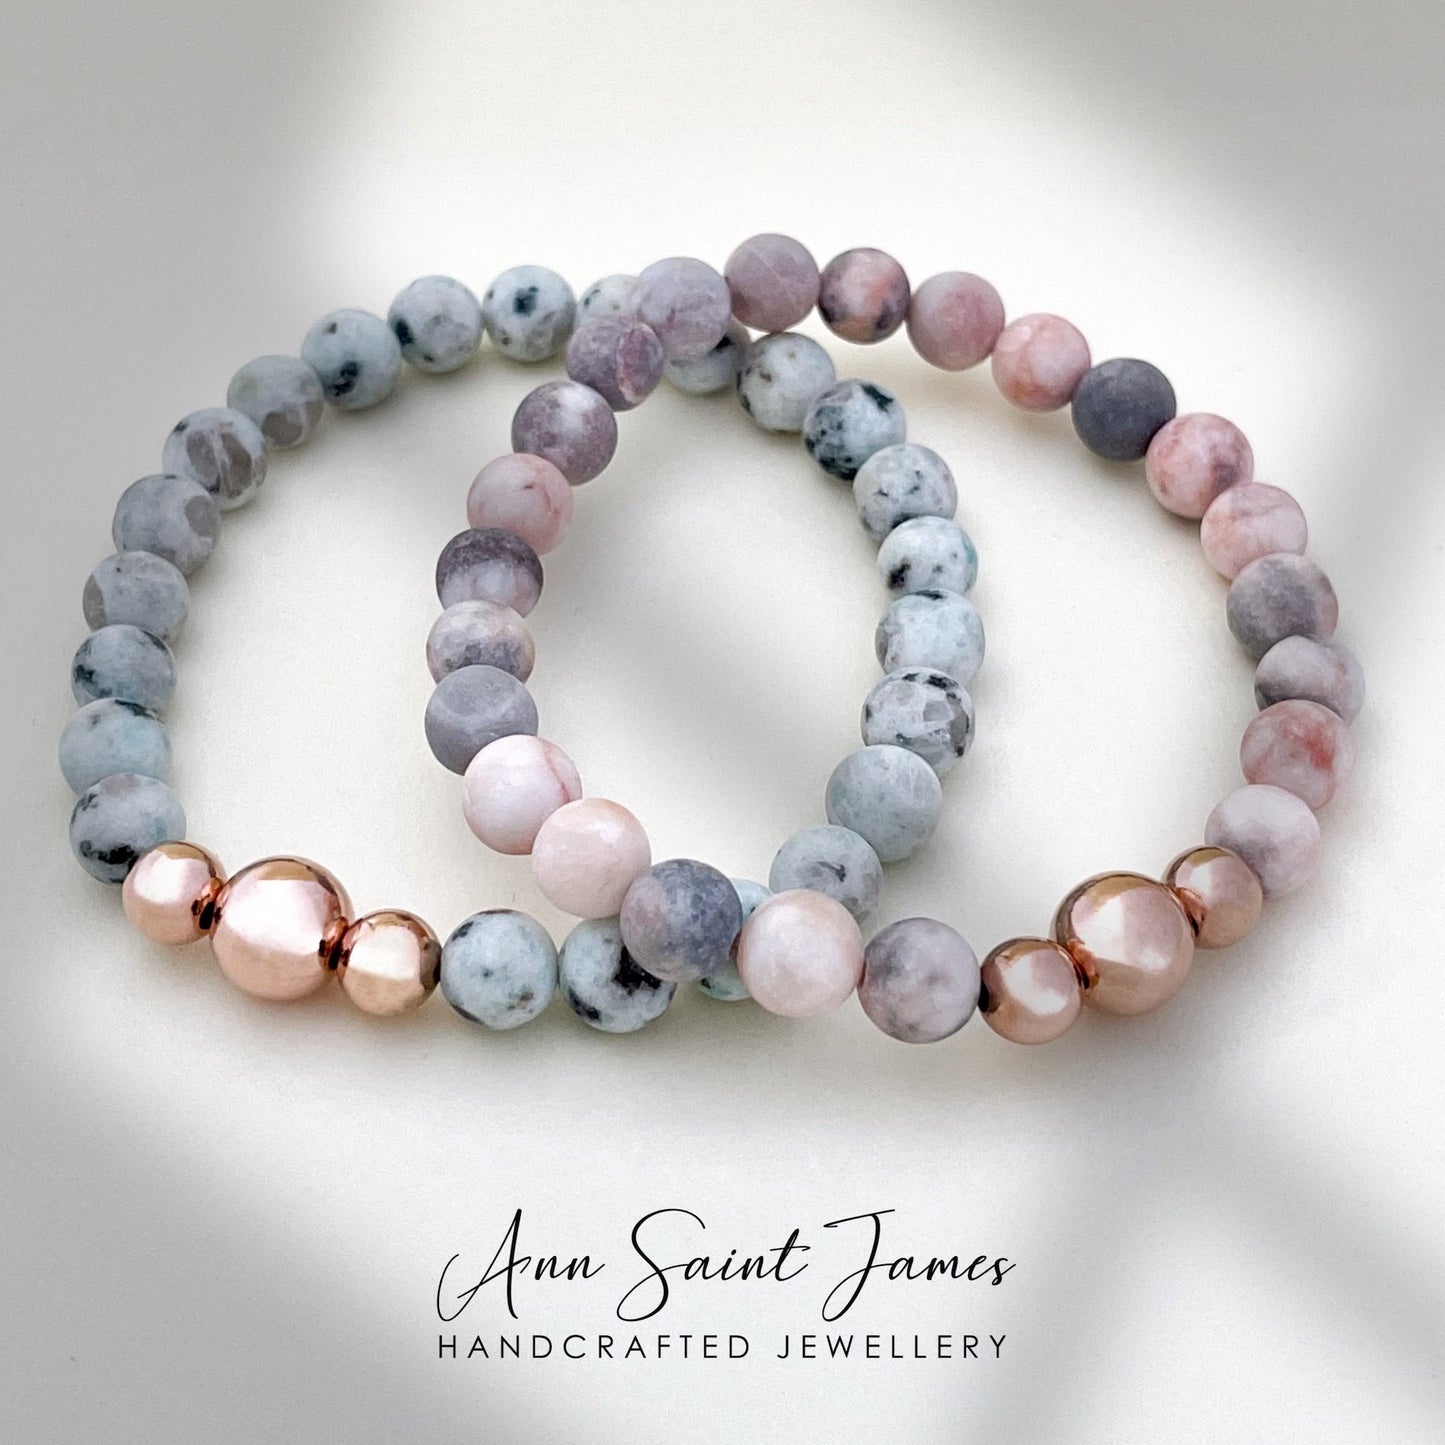 Inspiring luxury beaded bracelets for women using semi precious stones and premium materials such as gold filled and sterling silver